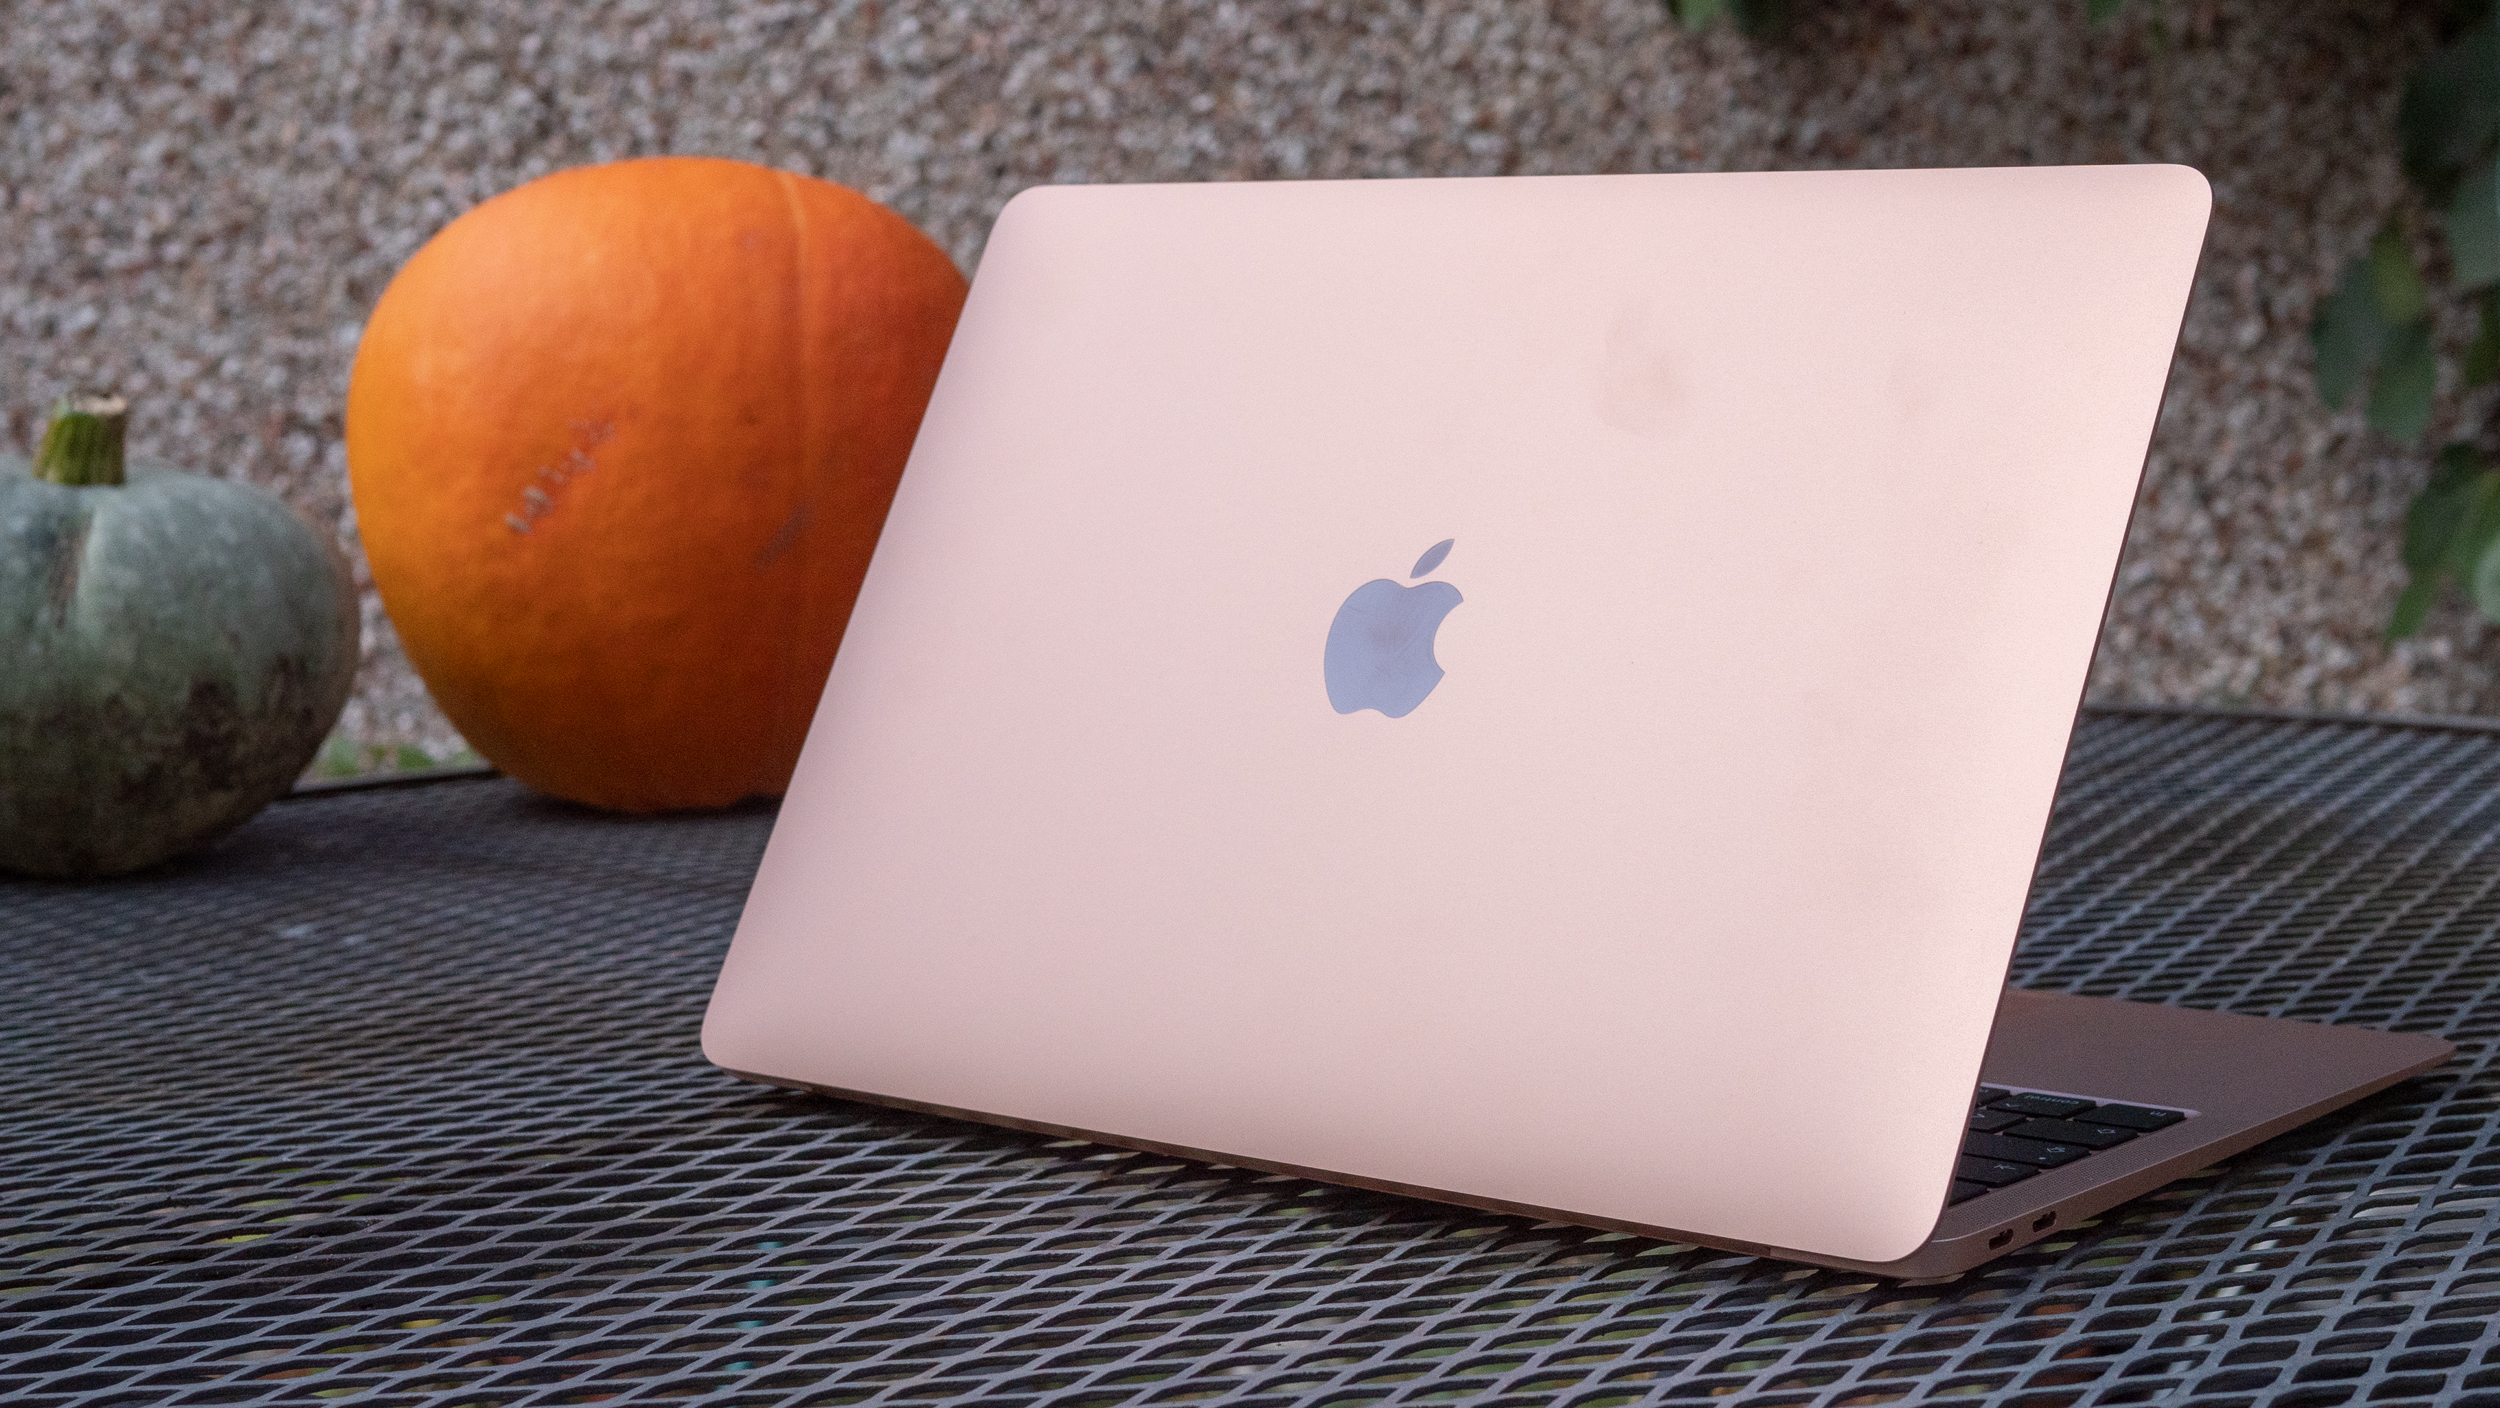 Apple MacBook Air (Apple M1, 2020) review: The world's best ultraportable